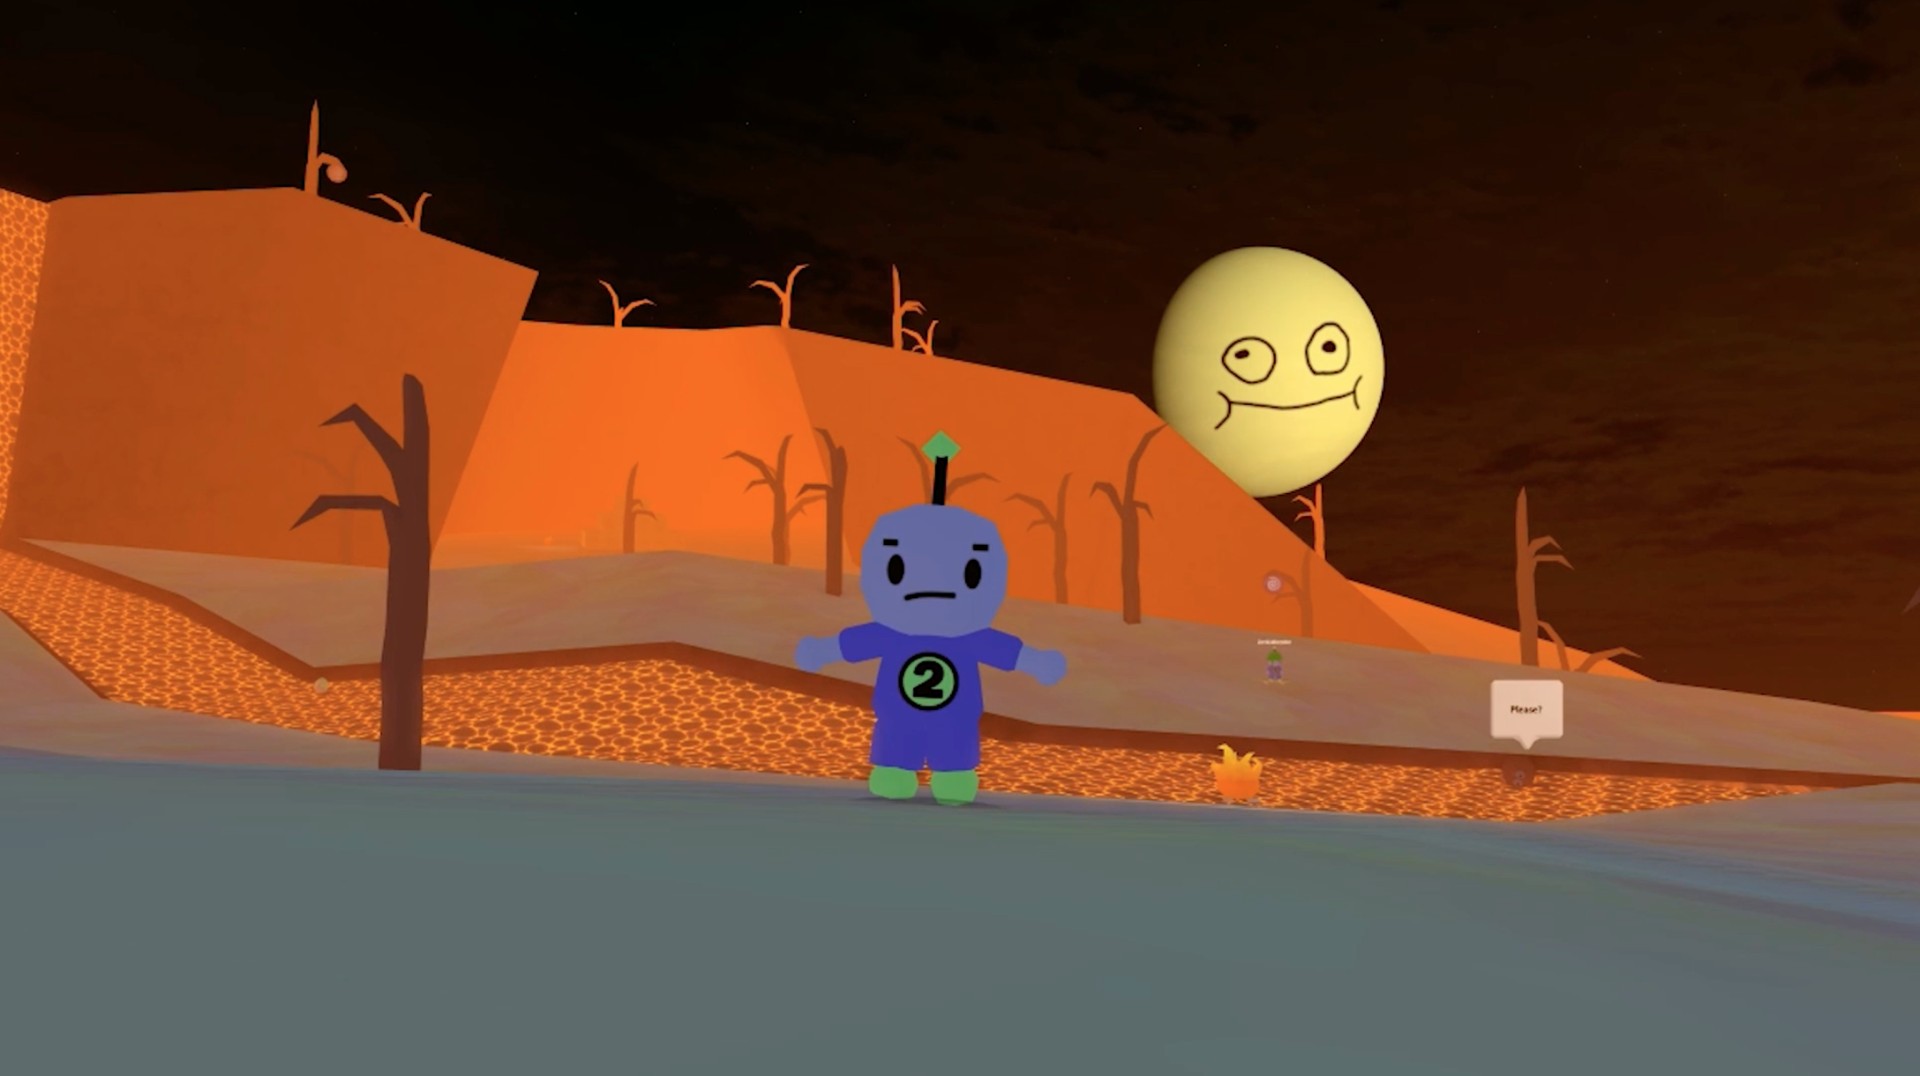 3d Platformer Robot 64 Is Now Available On Roblox For Xbox One Xbox Wire - roblox google+